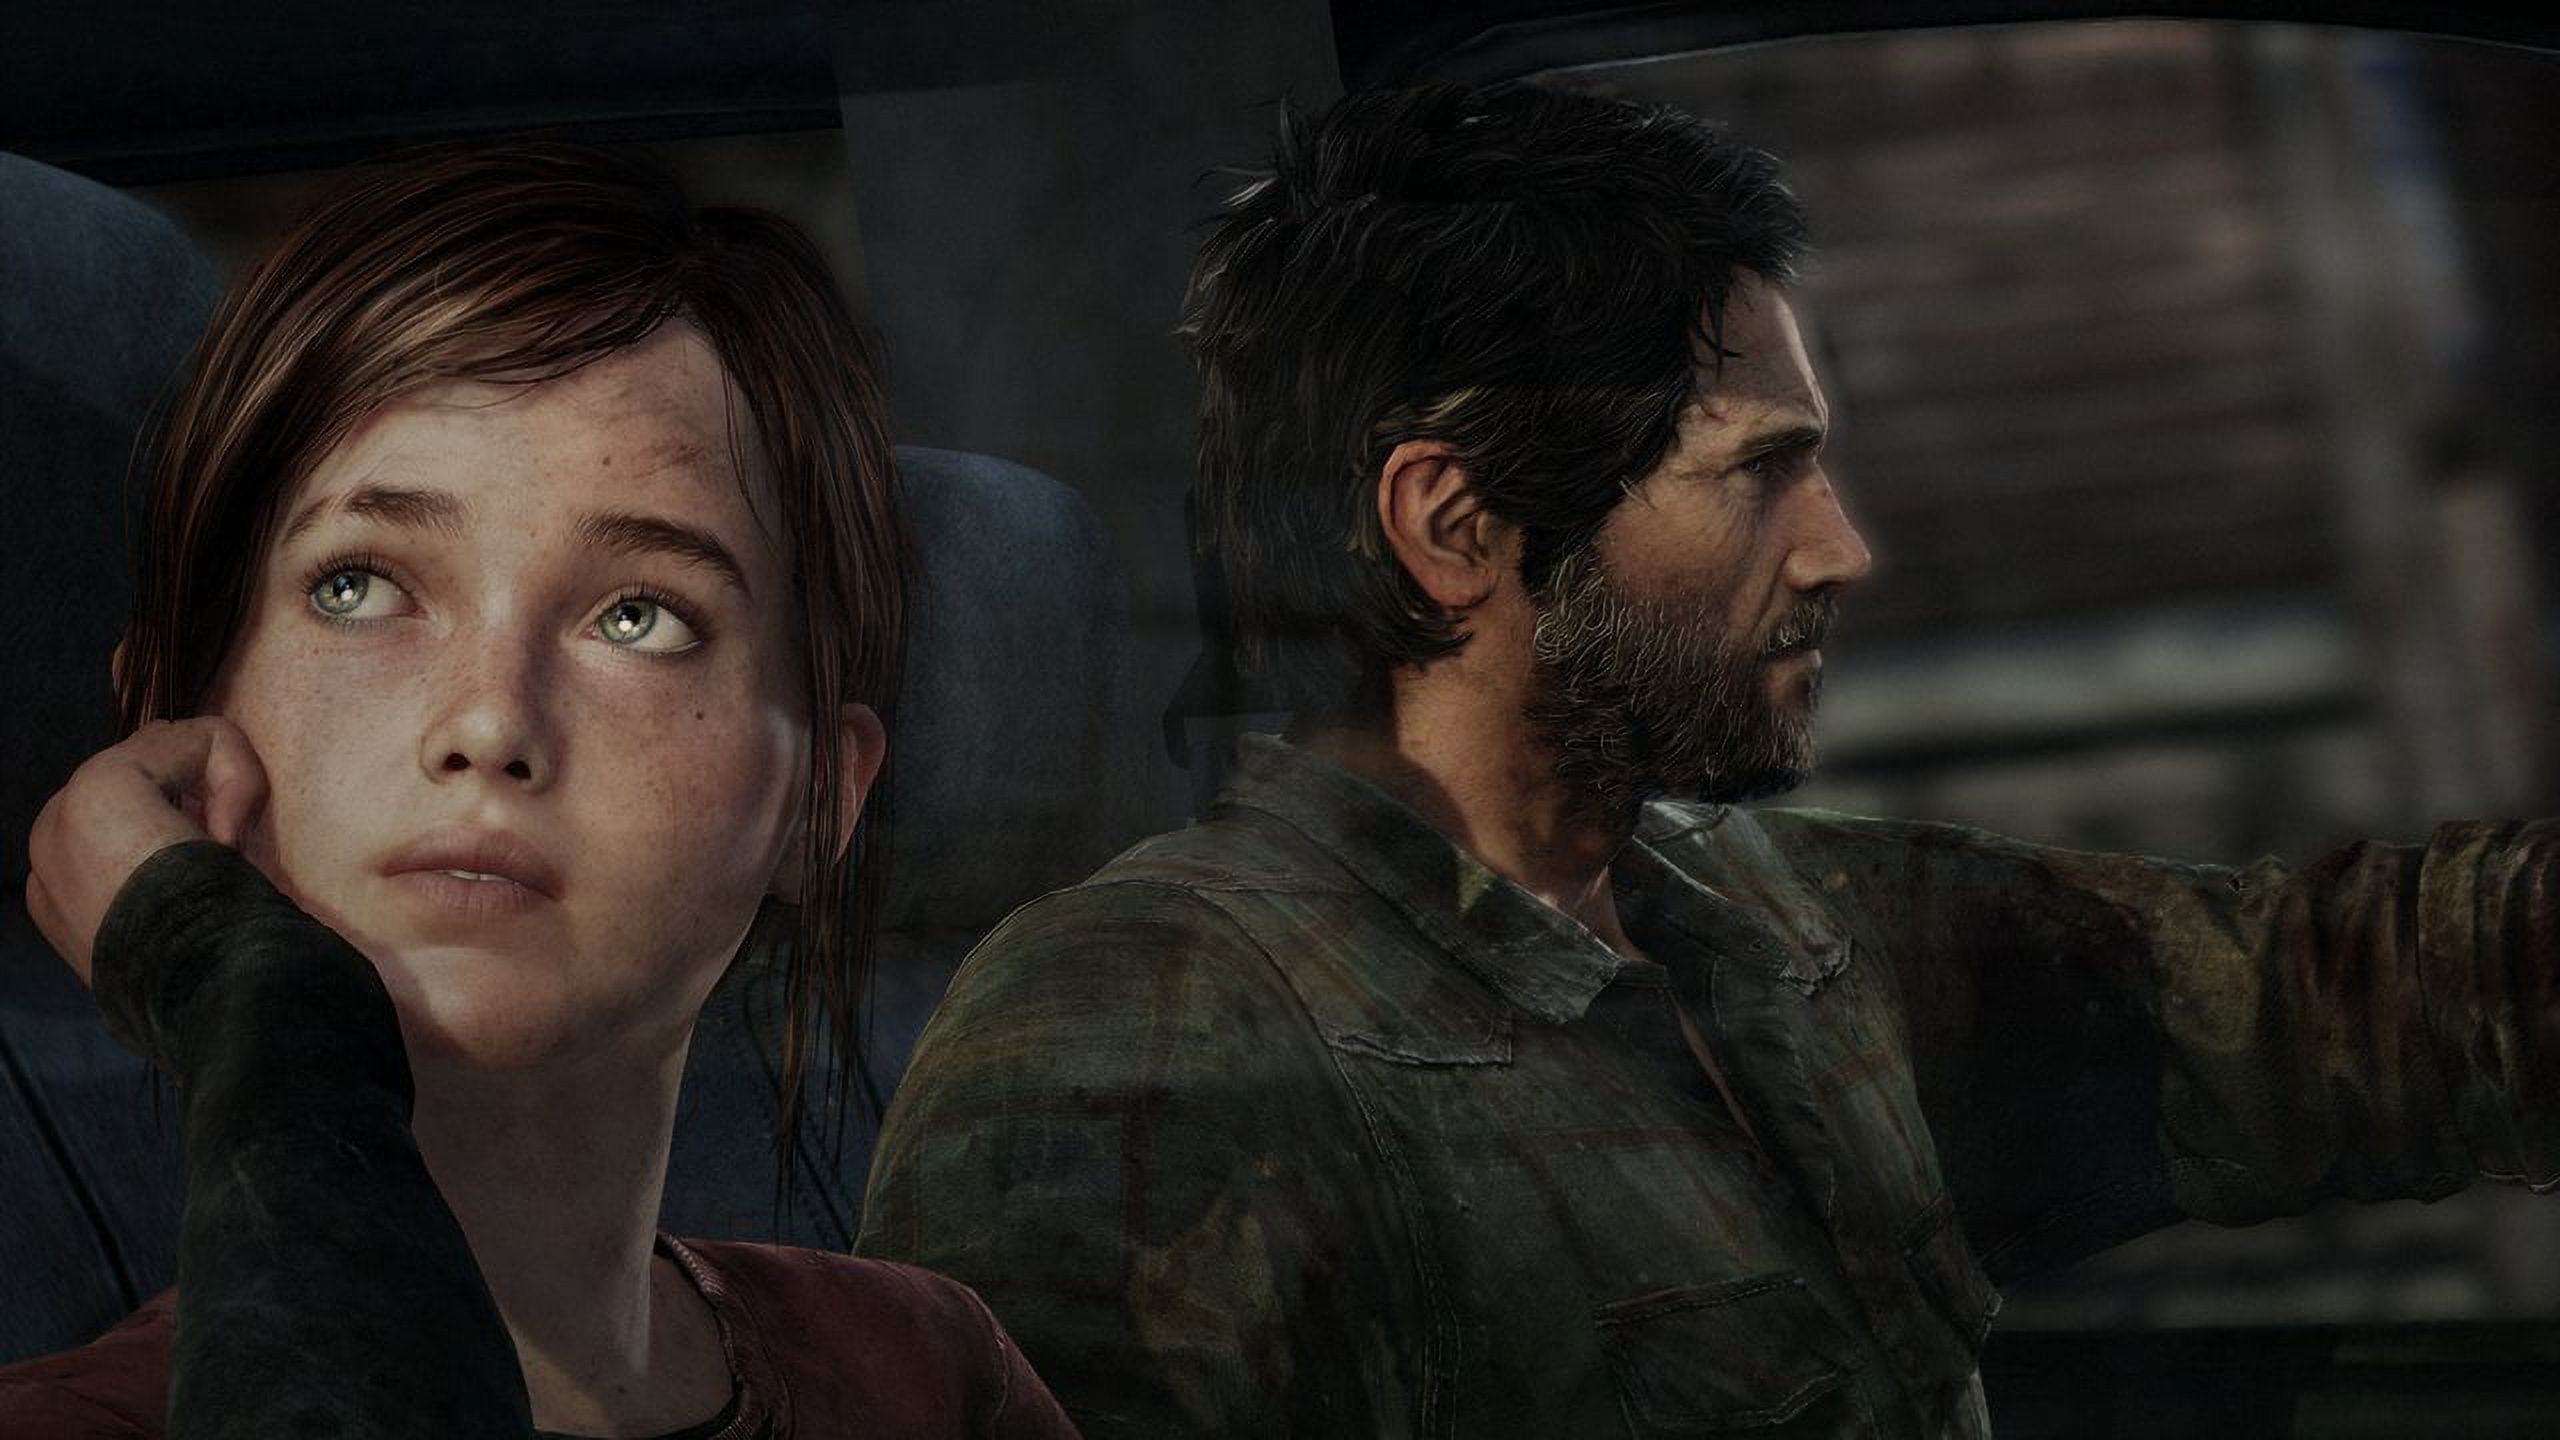 The Last of us - PS3